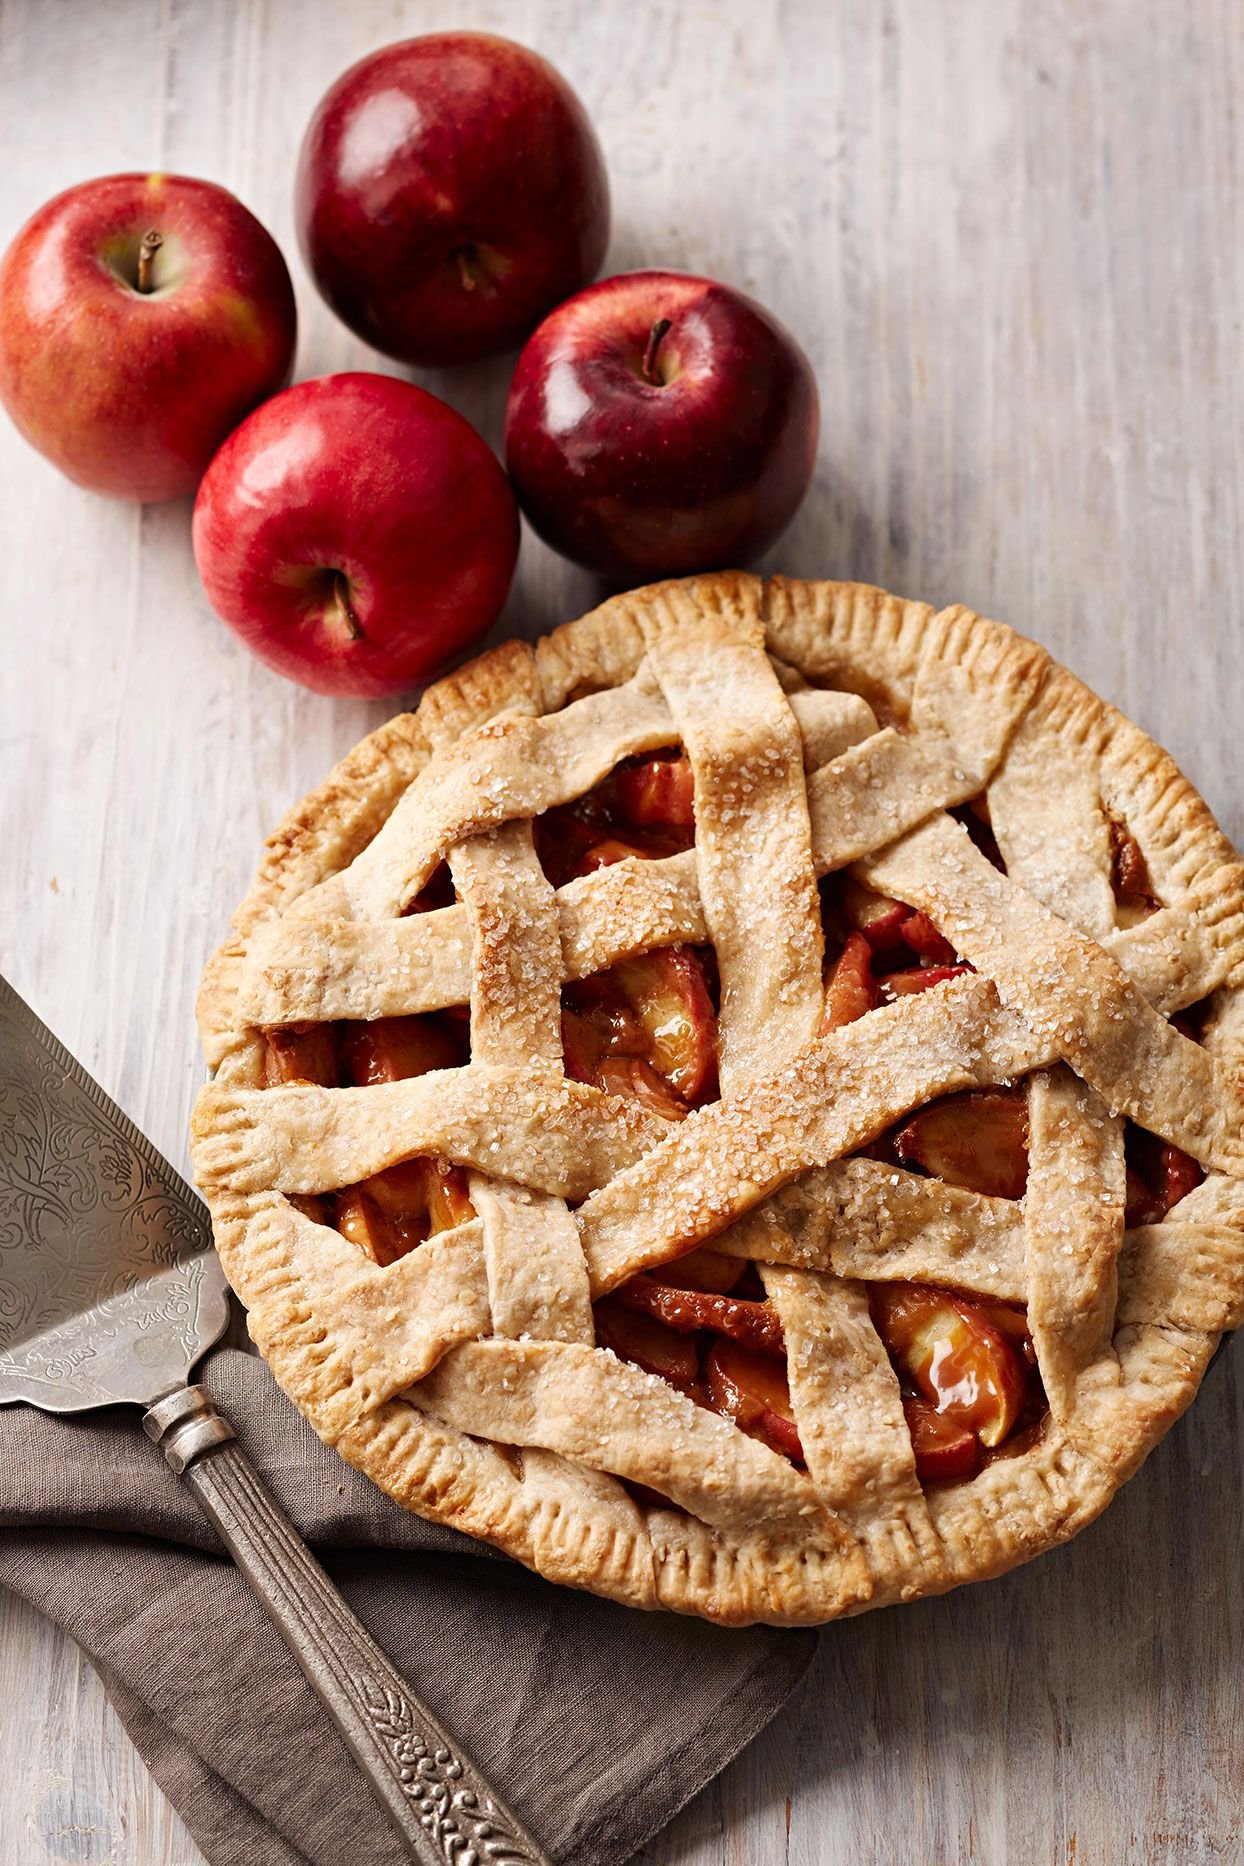 22 of Our Best Pie Recipes for Your Most Unforgettable Slice Ever